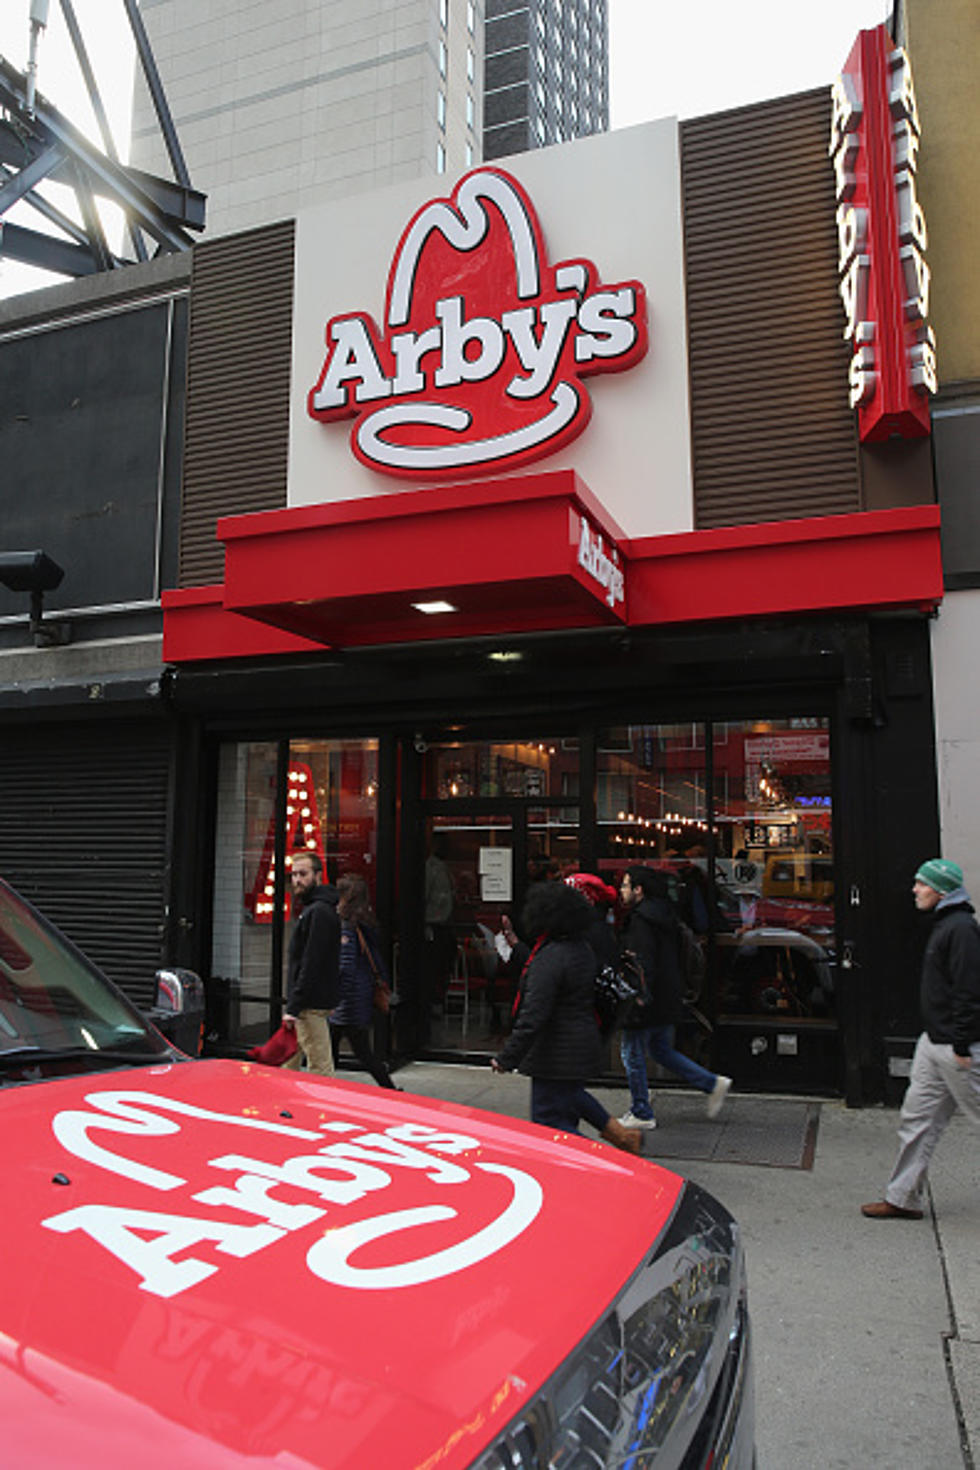 Deer-meat Lovers Rejoice! Arby’s Going to Test Venison Sandwiches